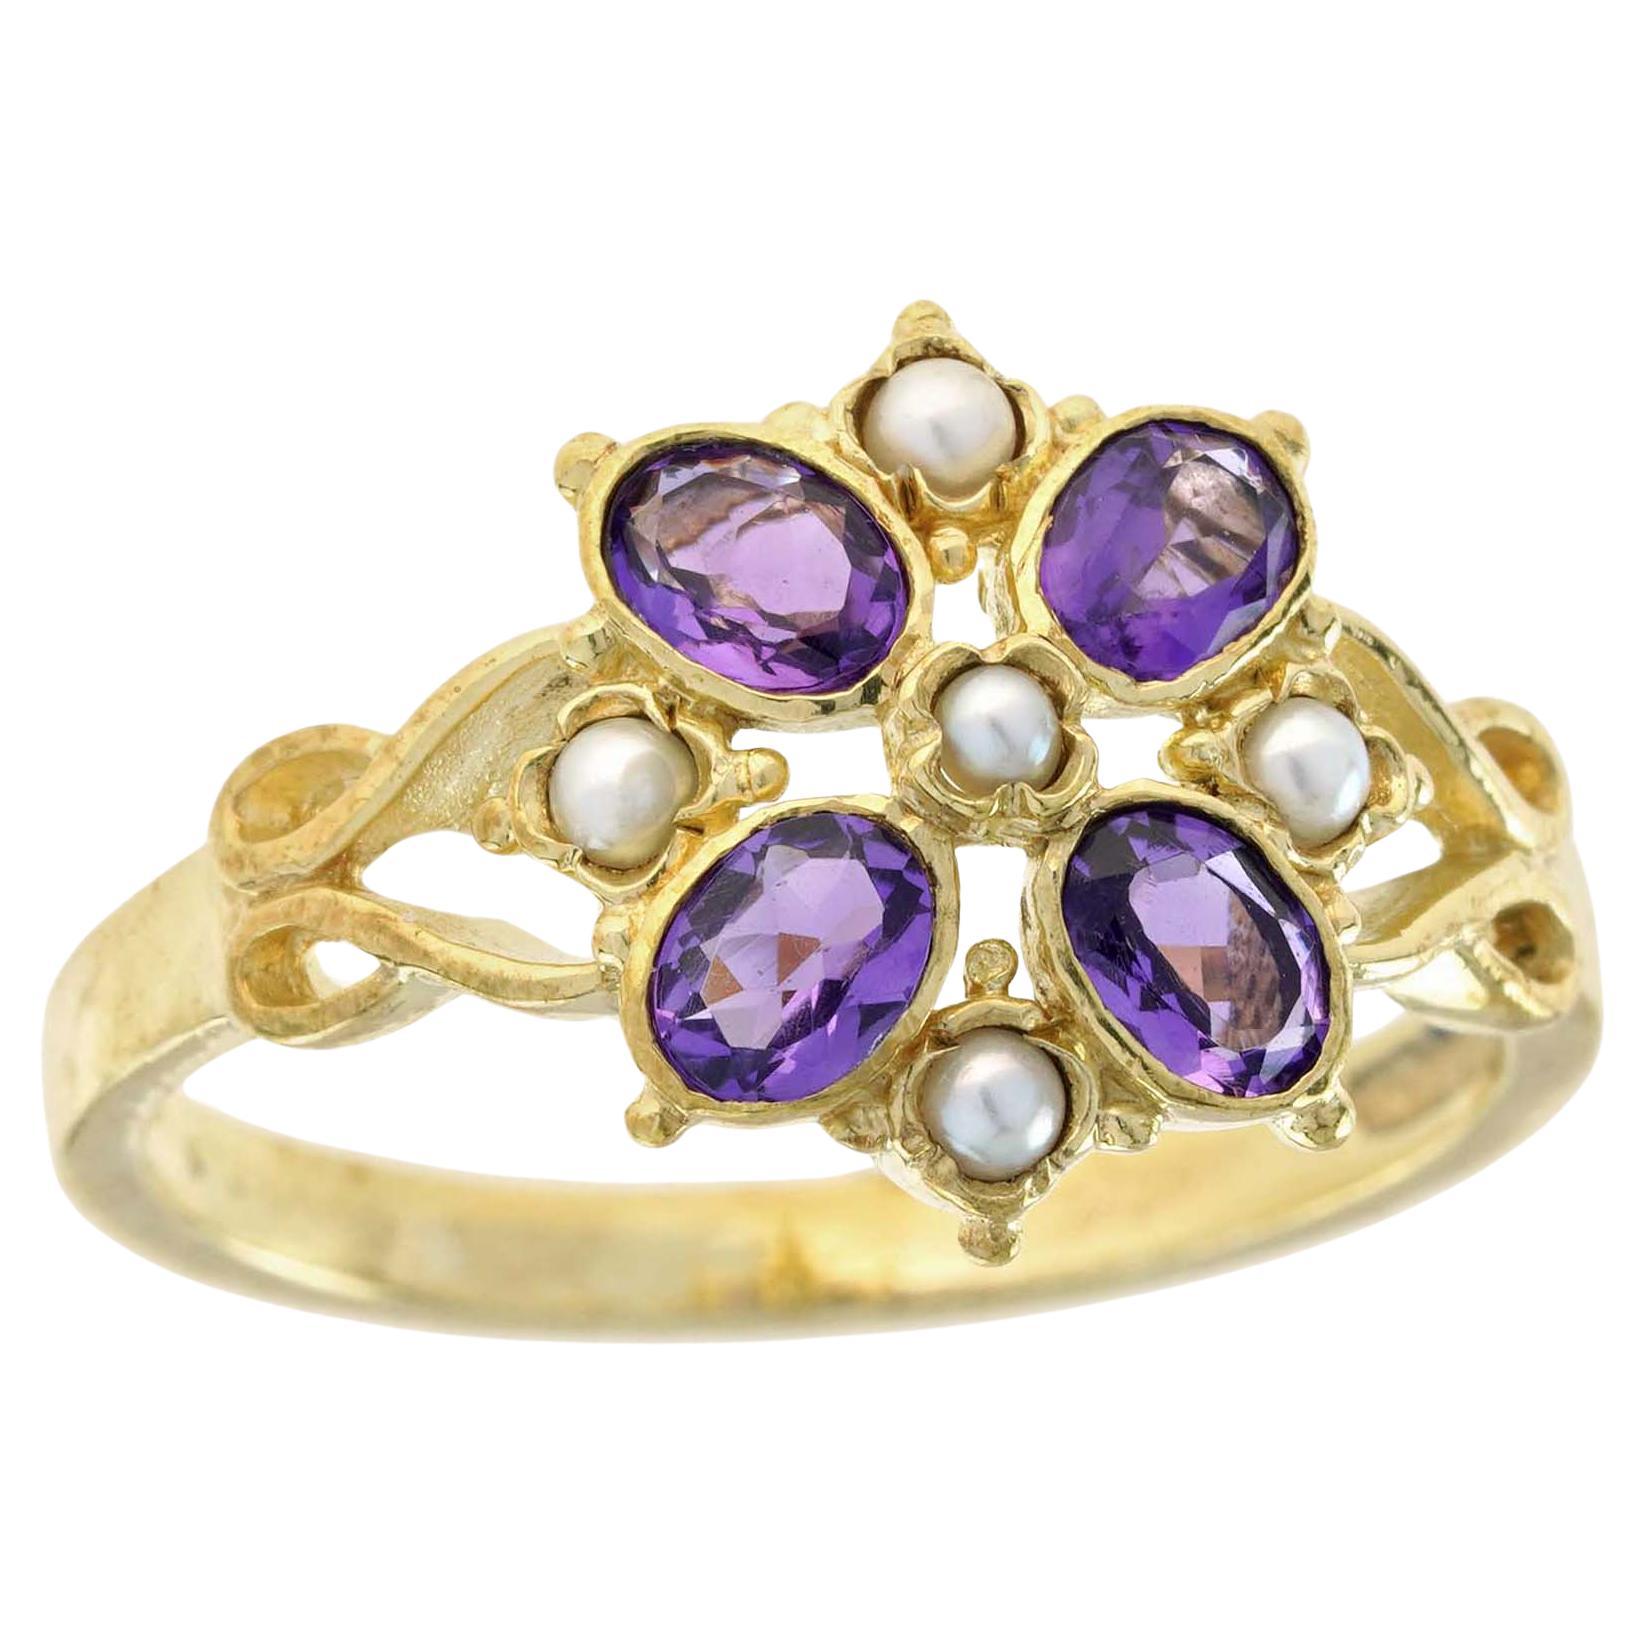 For Sale:  Natural Amethyst and Pearl Vintage Style Floral Cluster Ring in Solid 9K Gold